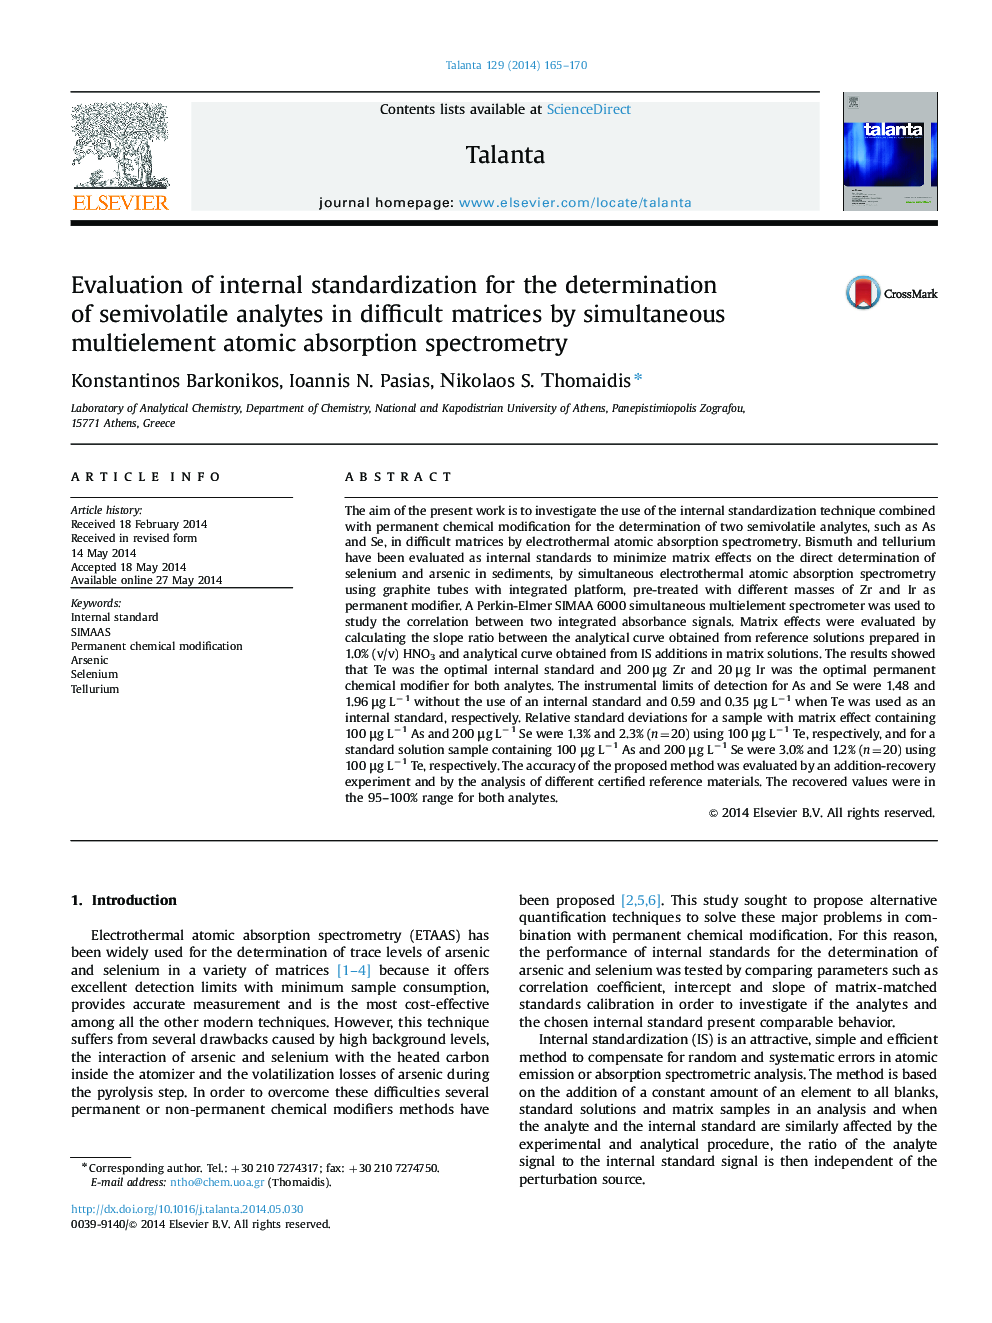 Evaluation of internal standardization for the determination of semivolatile analytes in difficult matrices by simultaneous multielement atomic absorption spectrometry